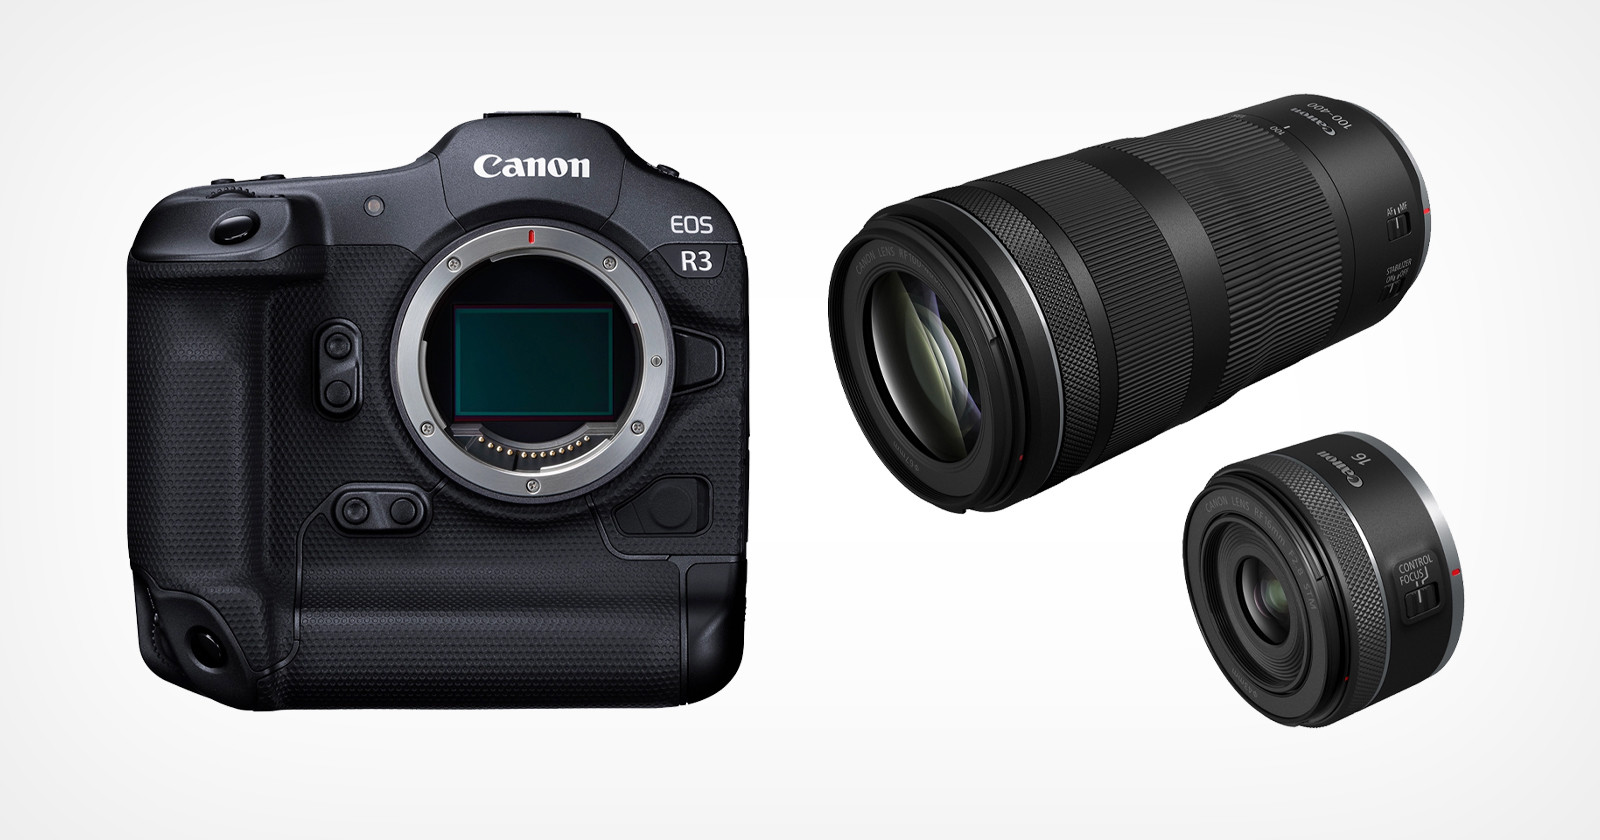  canon says can meet demand any 